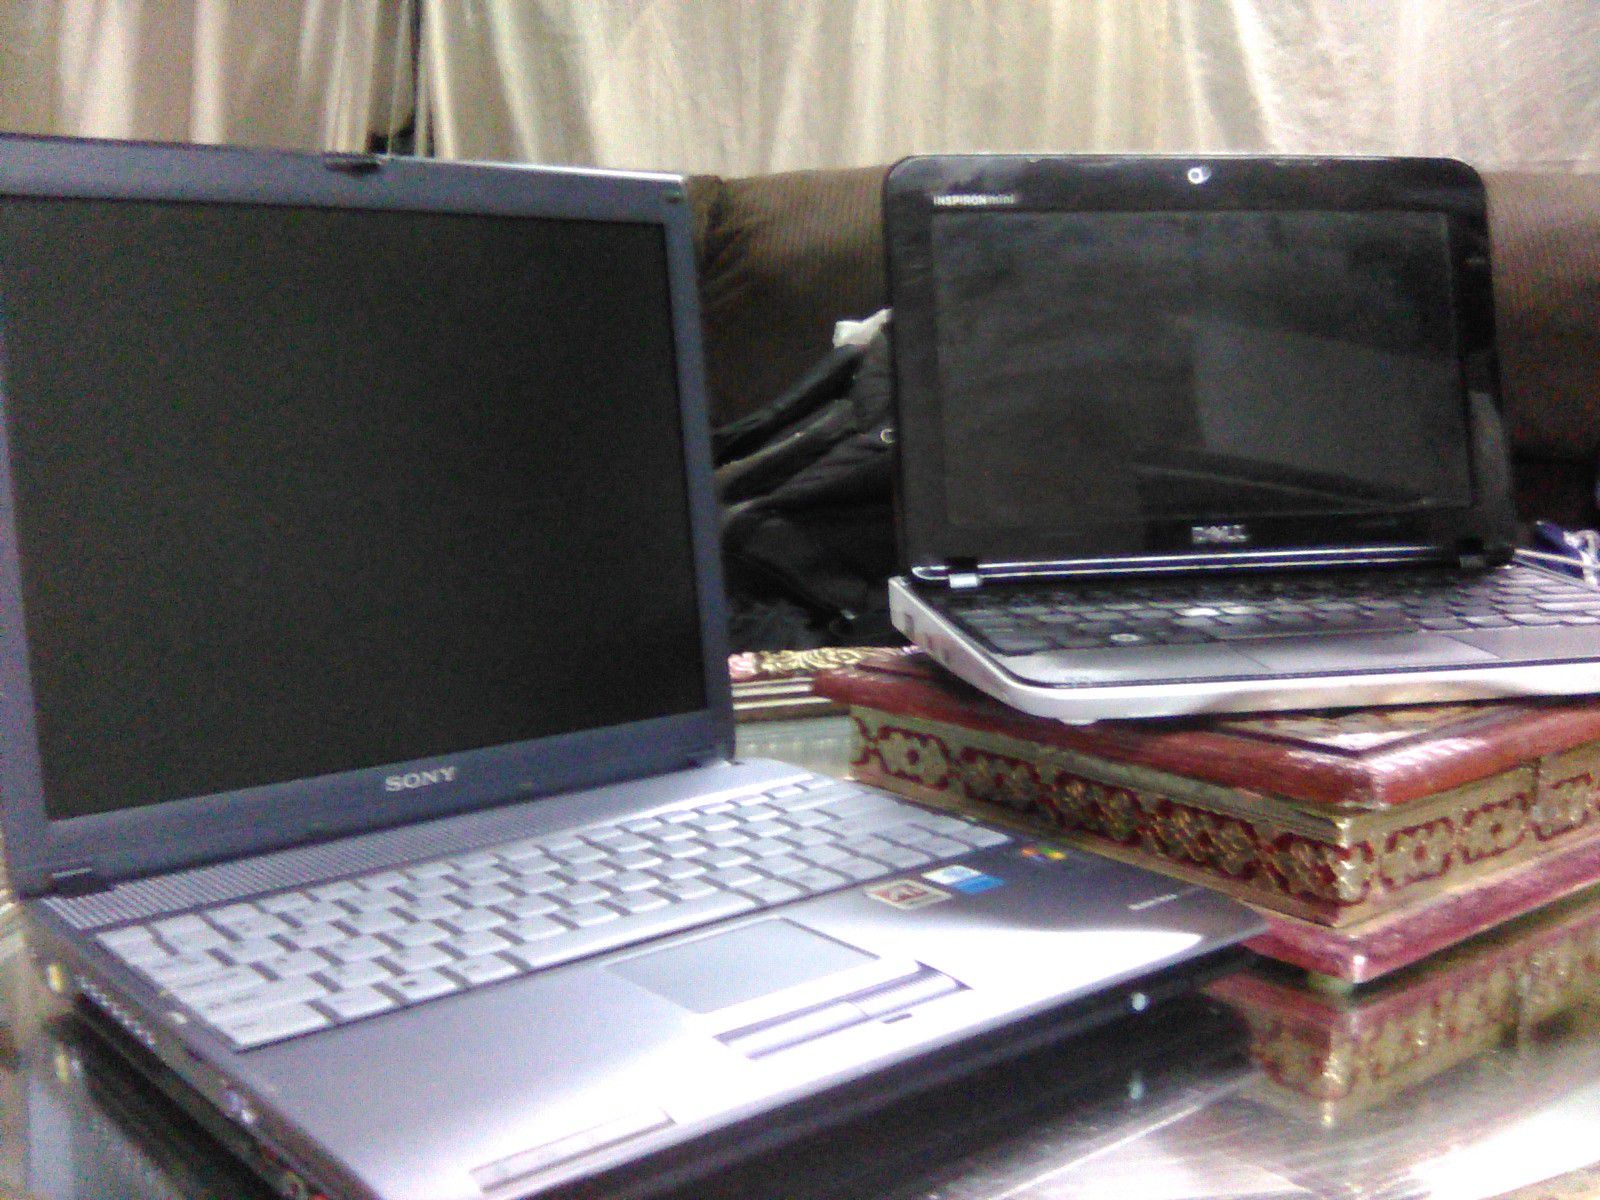 SONY VIO. MOST POPULAR AND WELL KNOWN LAPTOP EVER BEEN ILT,ALMOST NEW CONDITION AND FAST